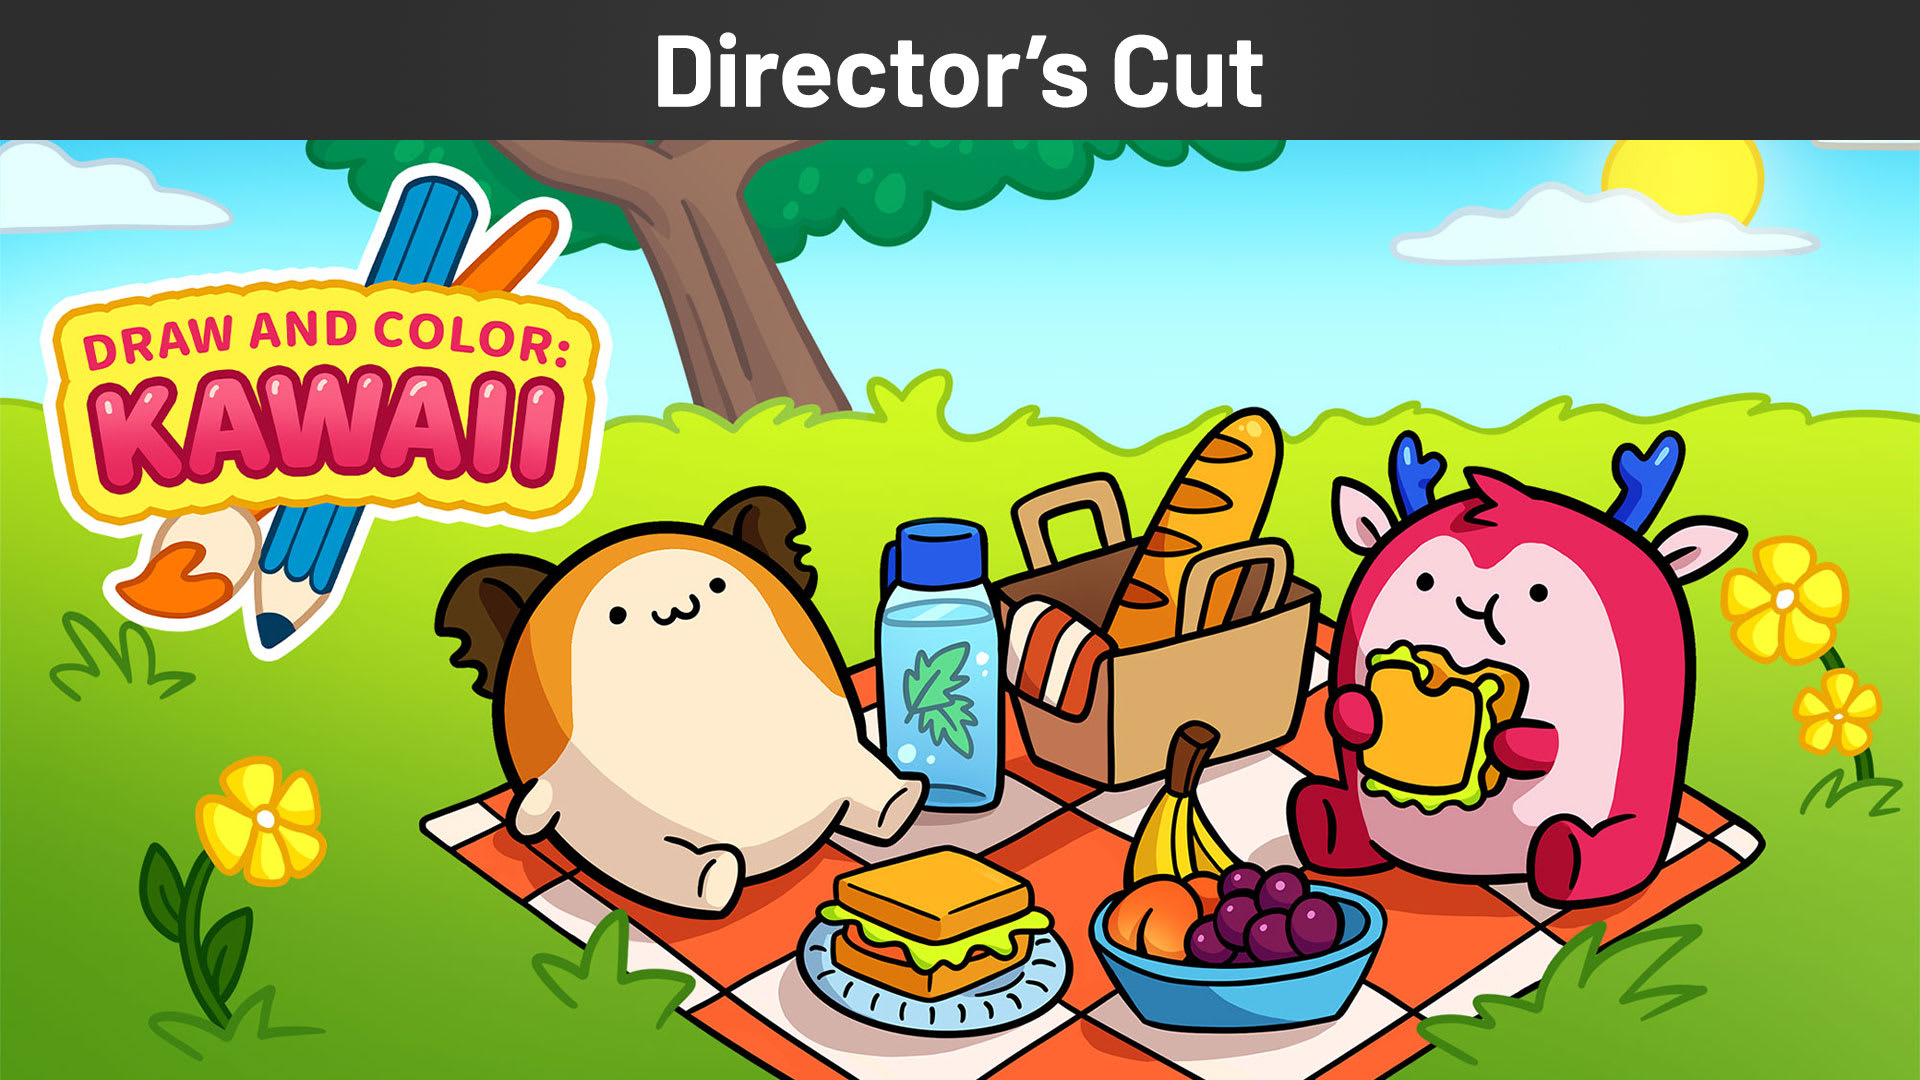 DRAW AND COLOR: KAWAII Director's Cut